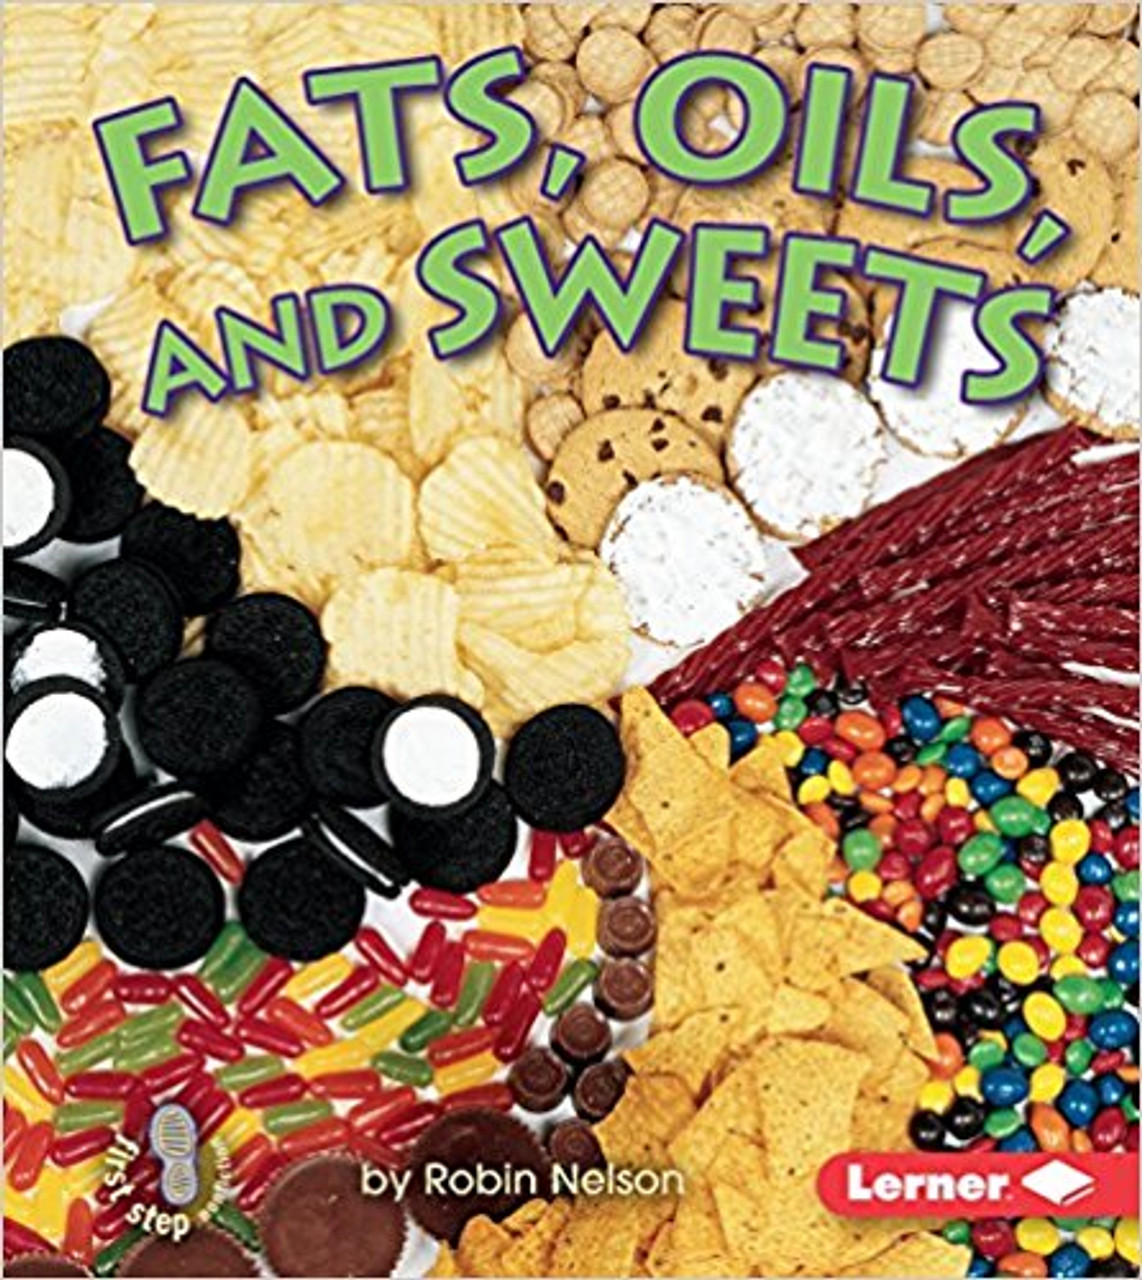 Fats, Oils, and Sweets by Robin Nelson